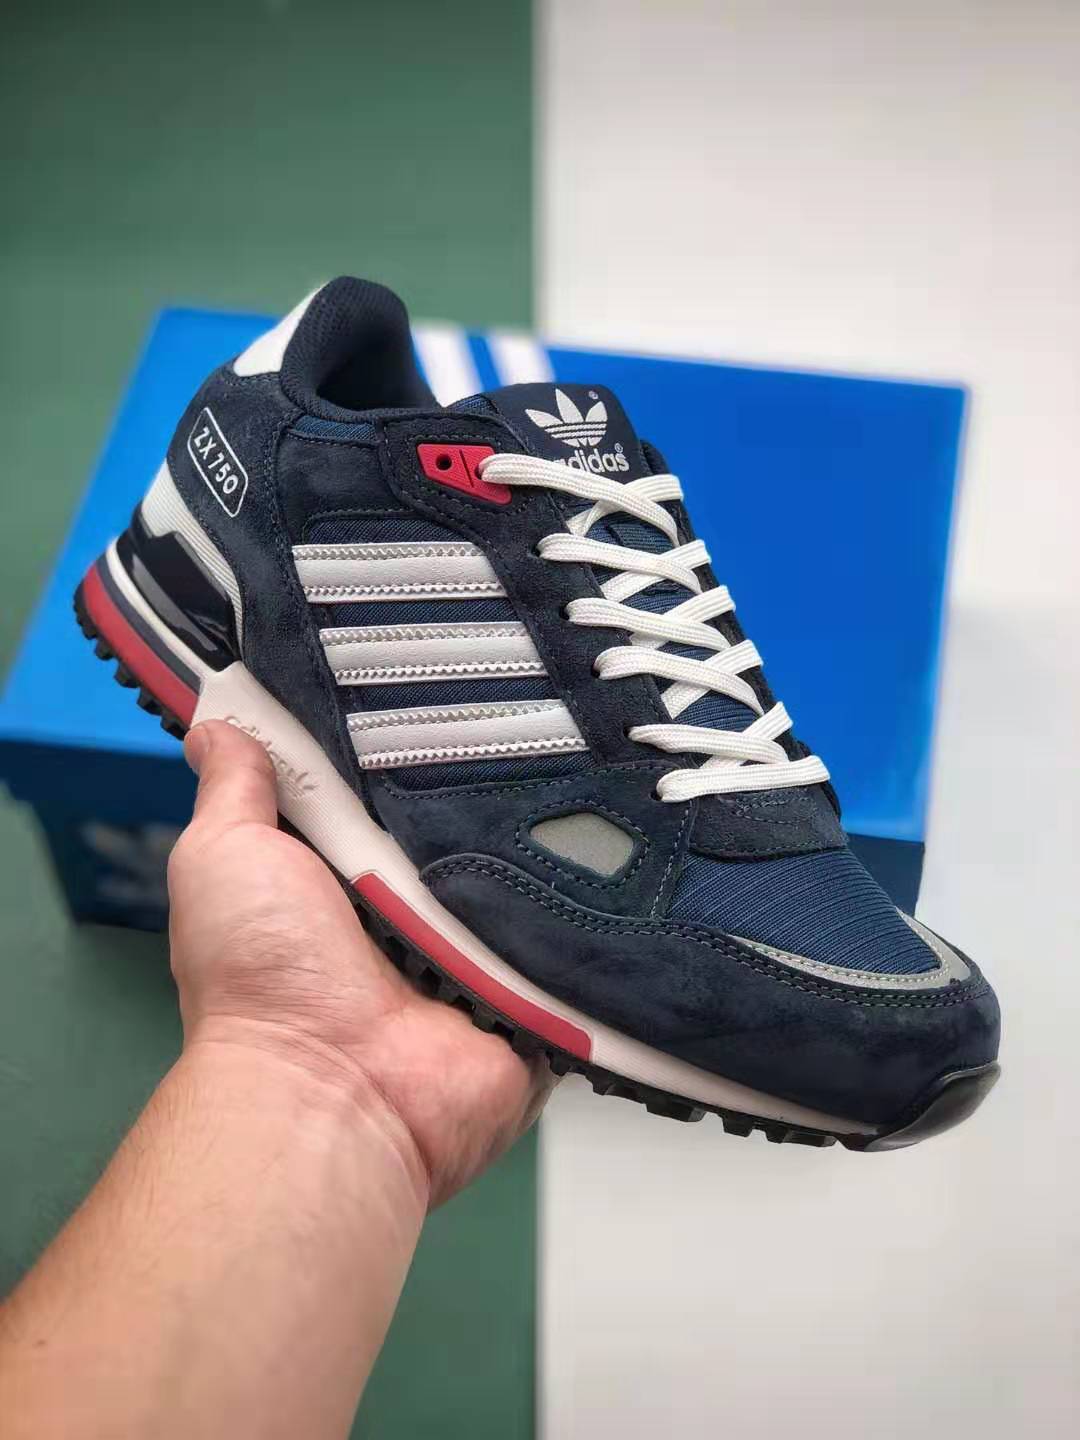 Adidas Originals ZX 750 Navy Blue Cloud White Shoes Q35065 | Stylish Sneakers